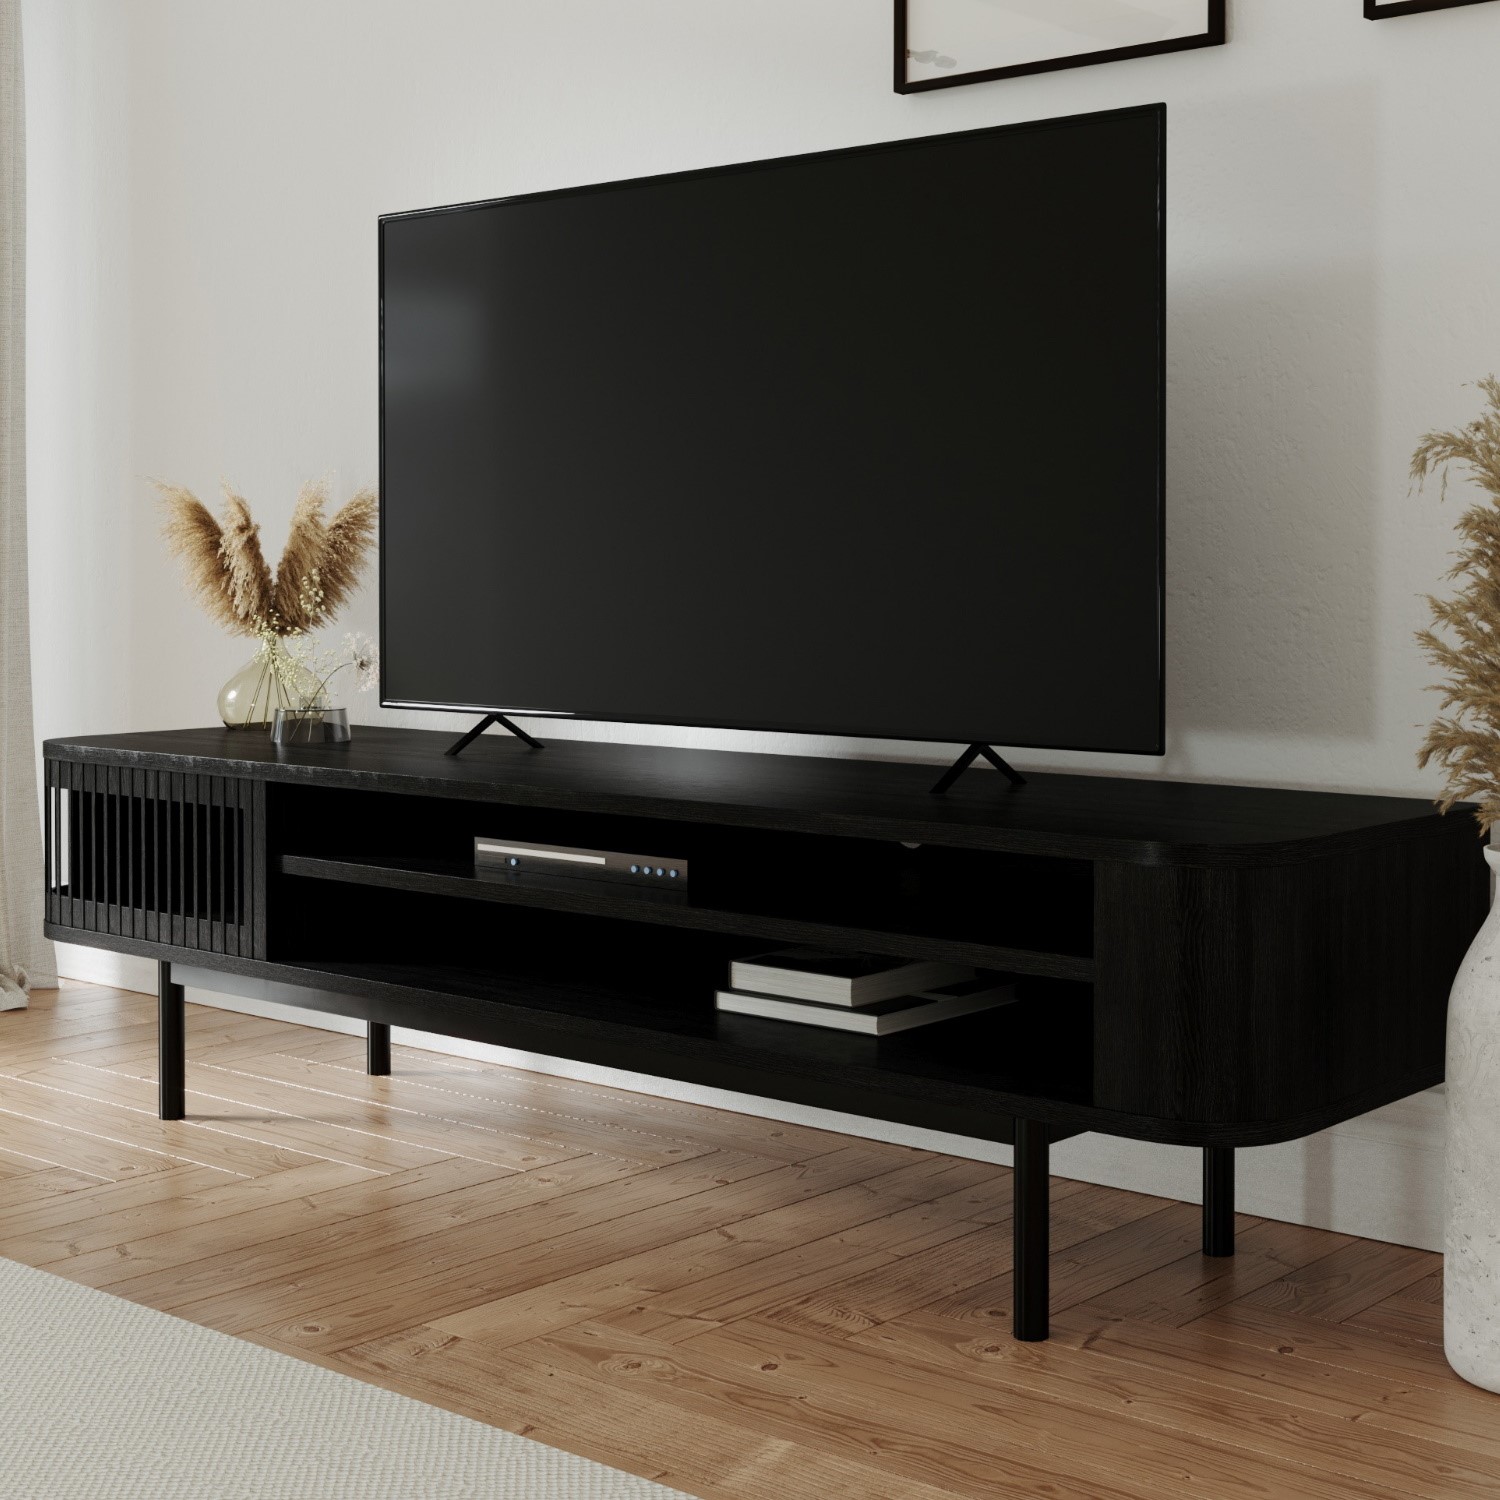 Read more about Wide black oak tv stand with storage tvs up to 77 jarel